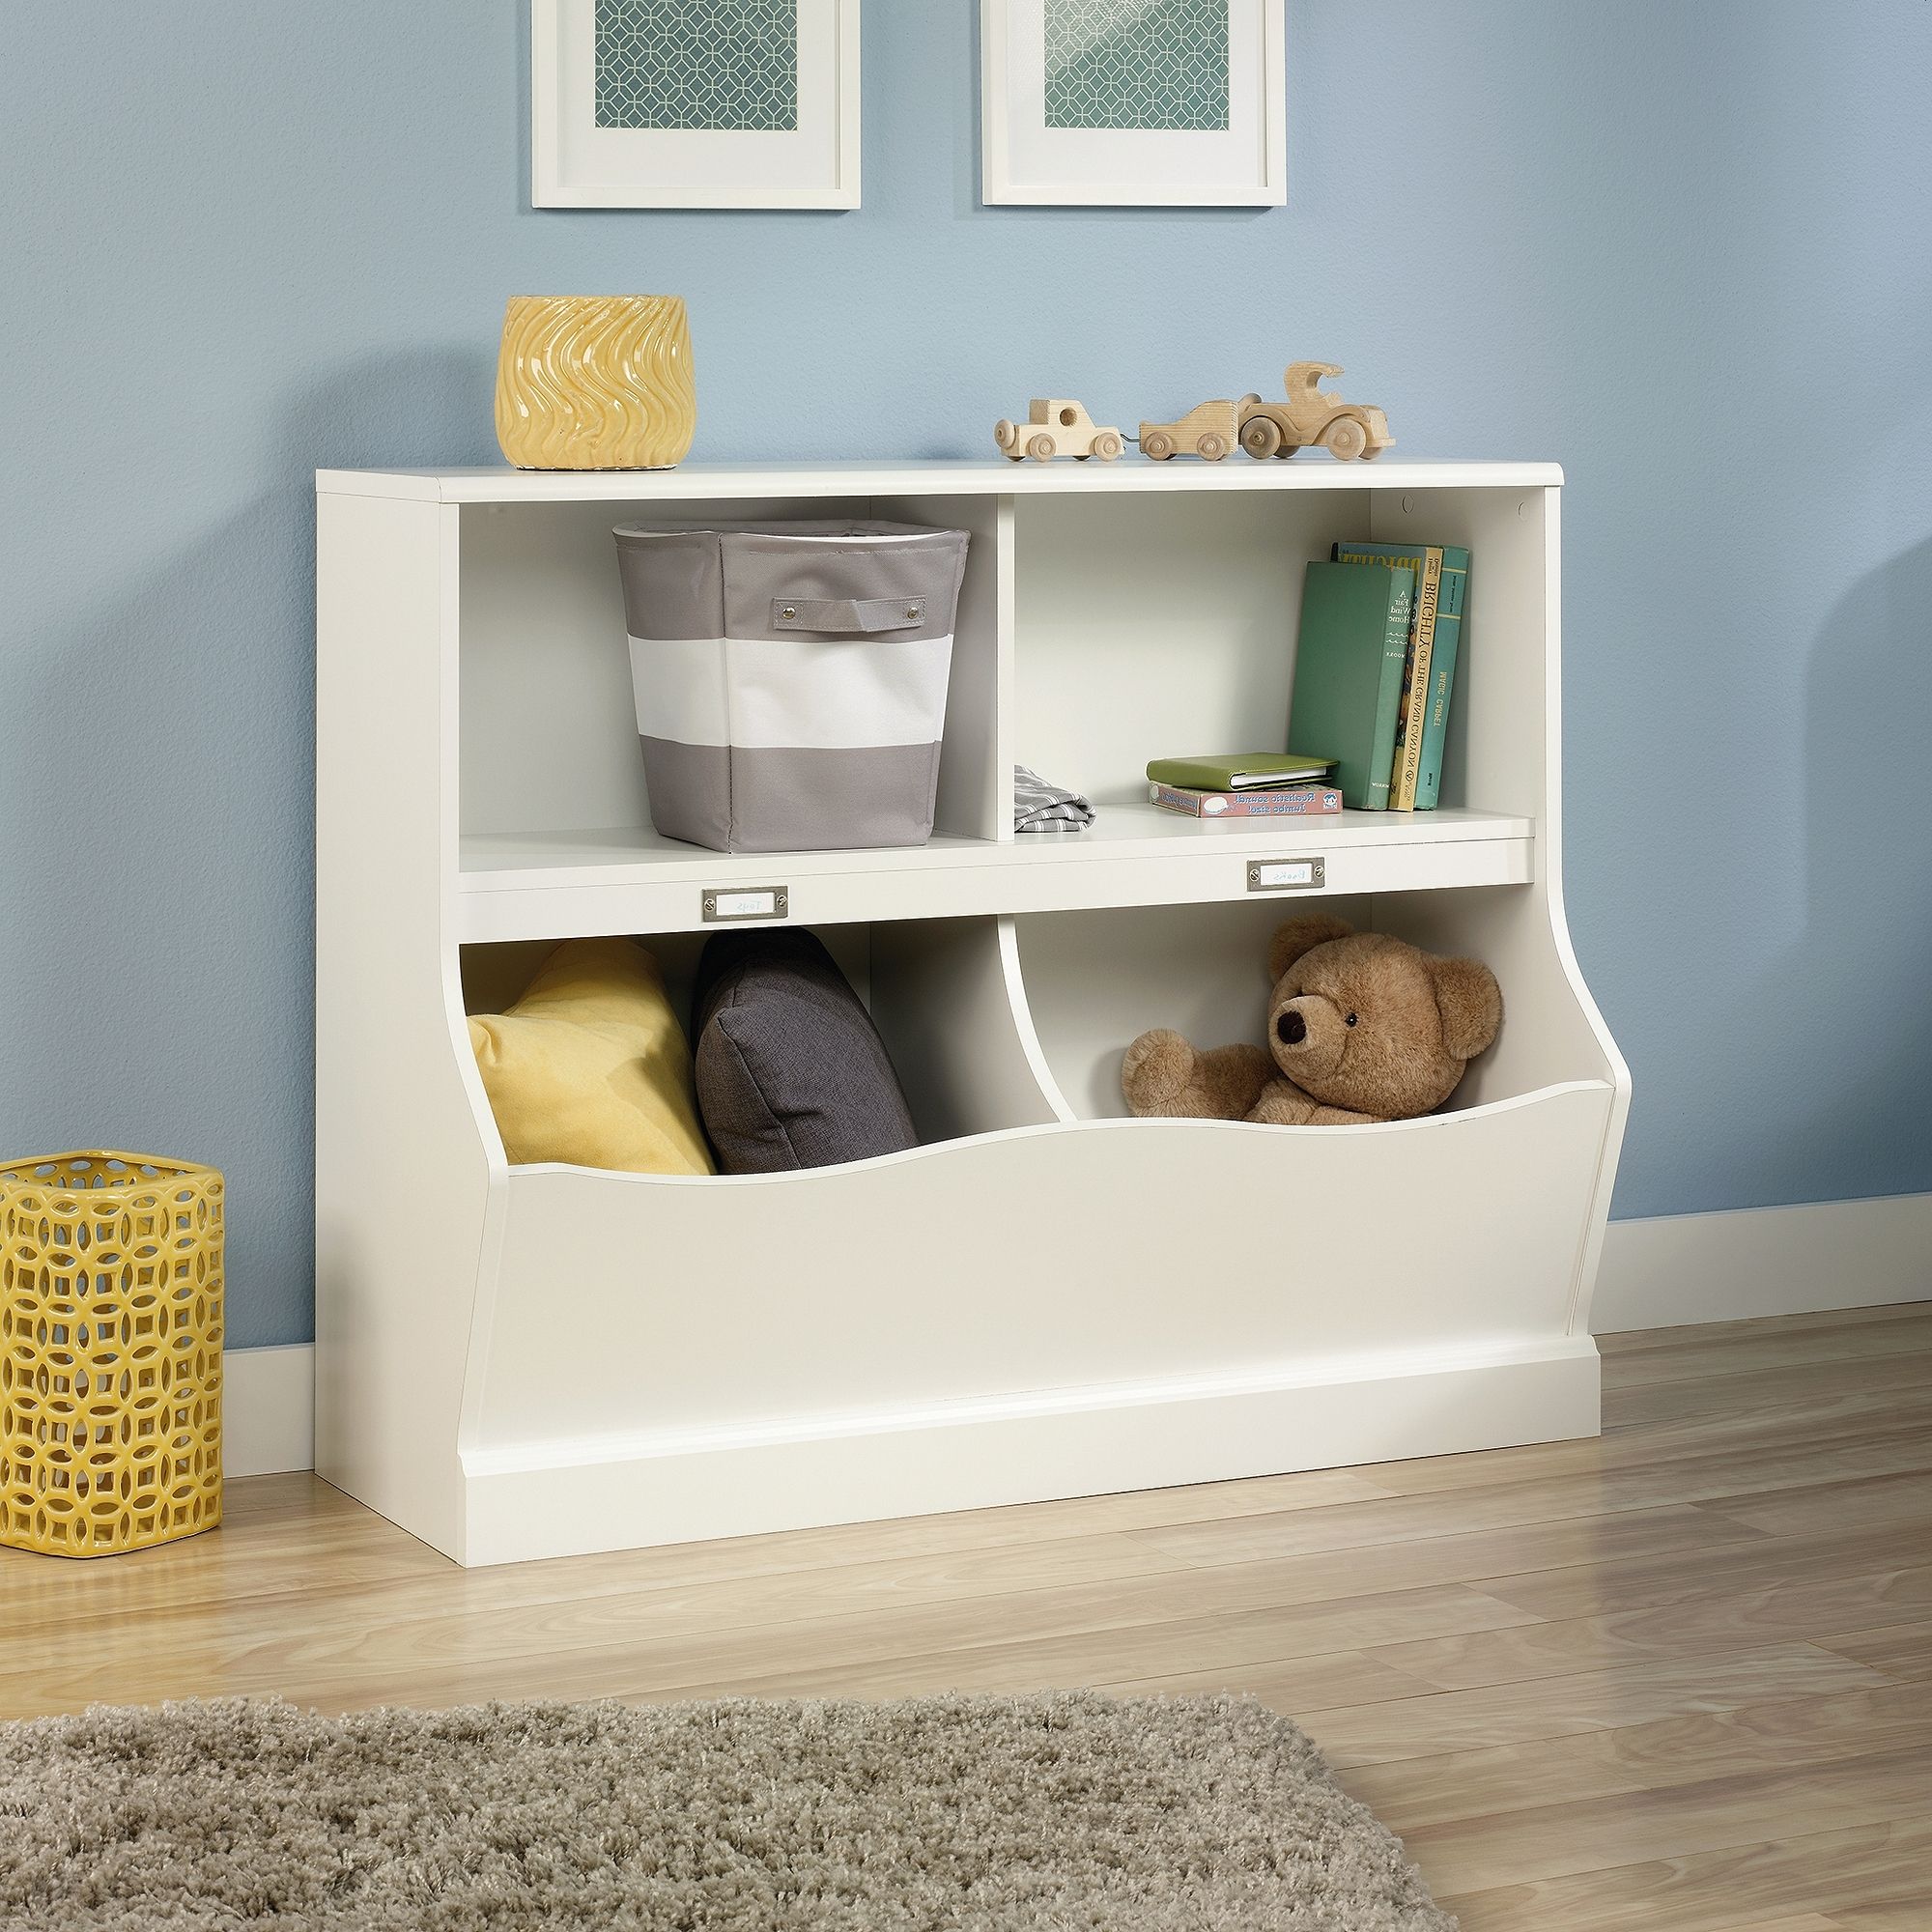 Sauder Storybook Storage Bin Bookcase, Soft White Finish – Walmart Intended For Most Current Walmart White Bookcases (View 8 of 15)